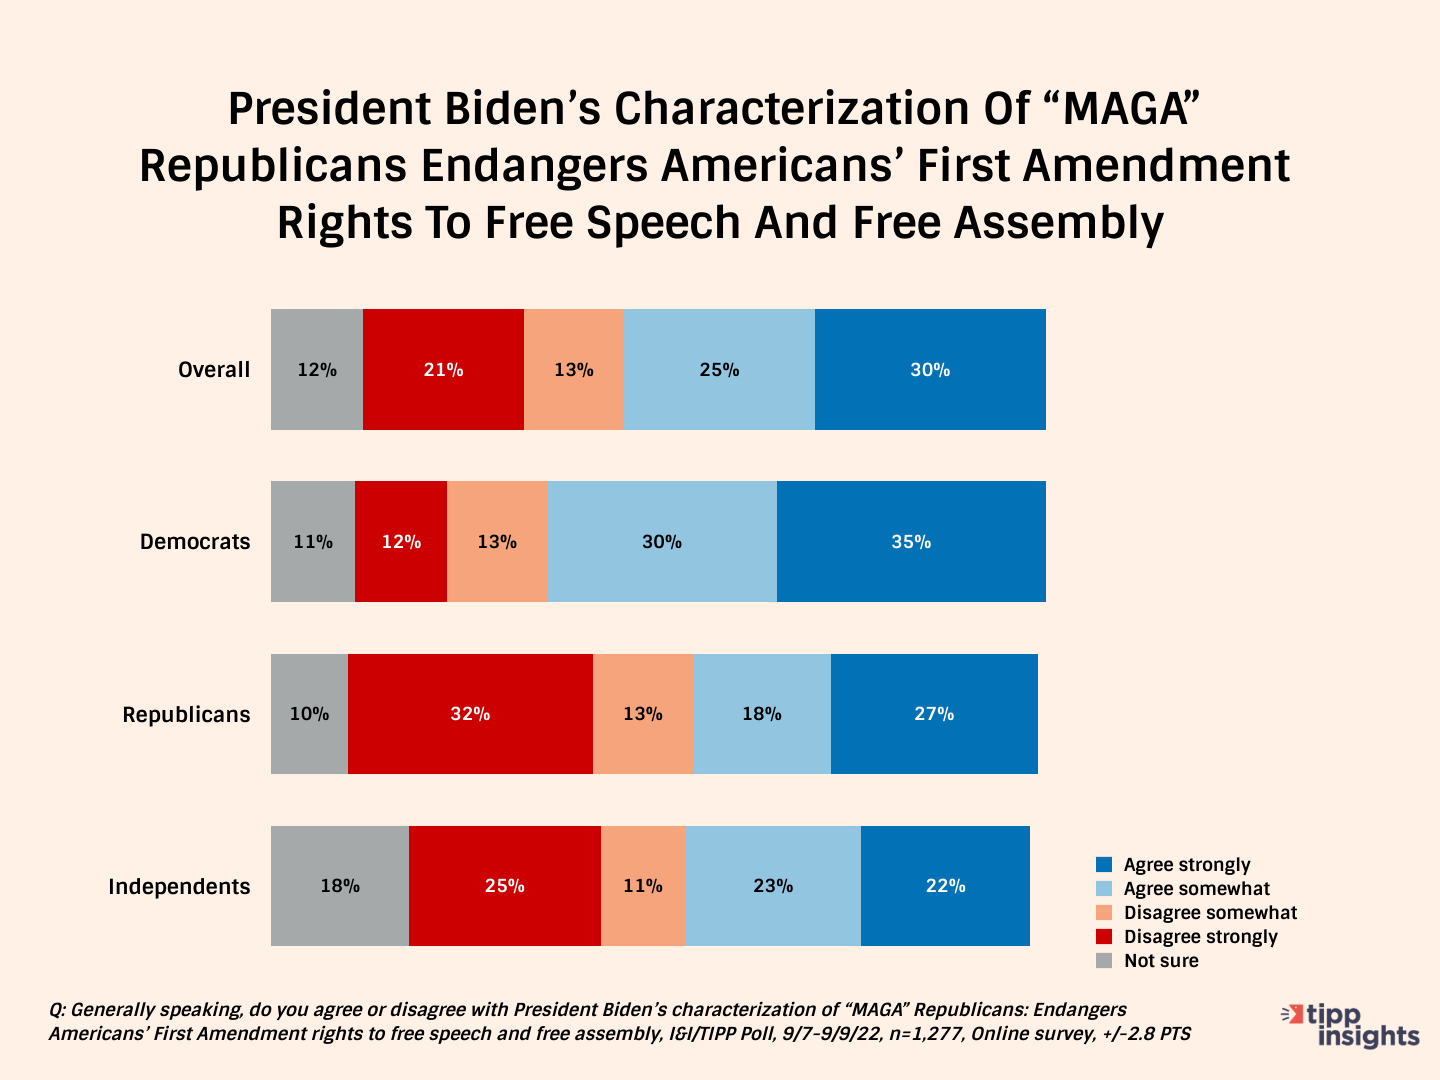 I&I/TIPP Poll results, 9/7-9/9/22: Chart showing whether Americans believe that President Biden's characterization of "MAGA" Republicans as being terrorists is a threat to America's first amendment rights to speech and assembly?